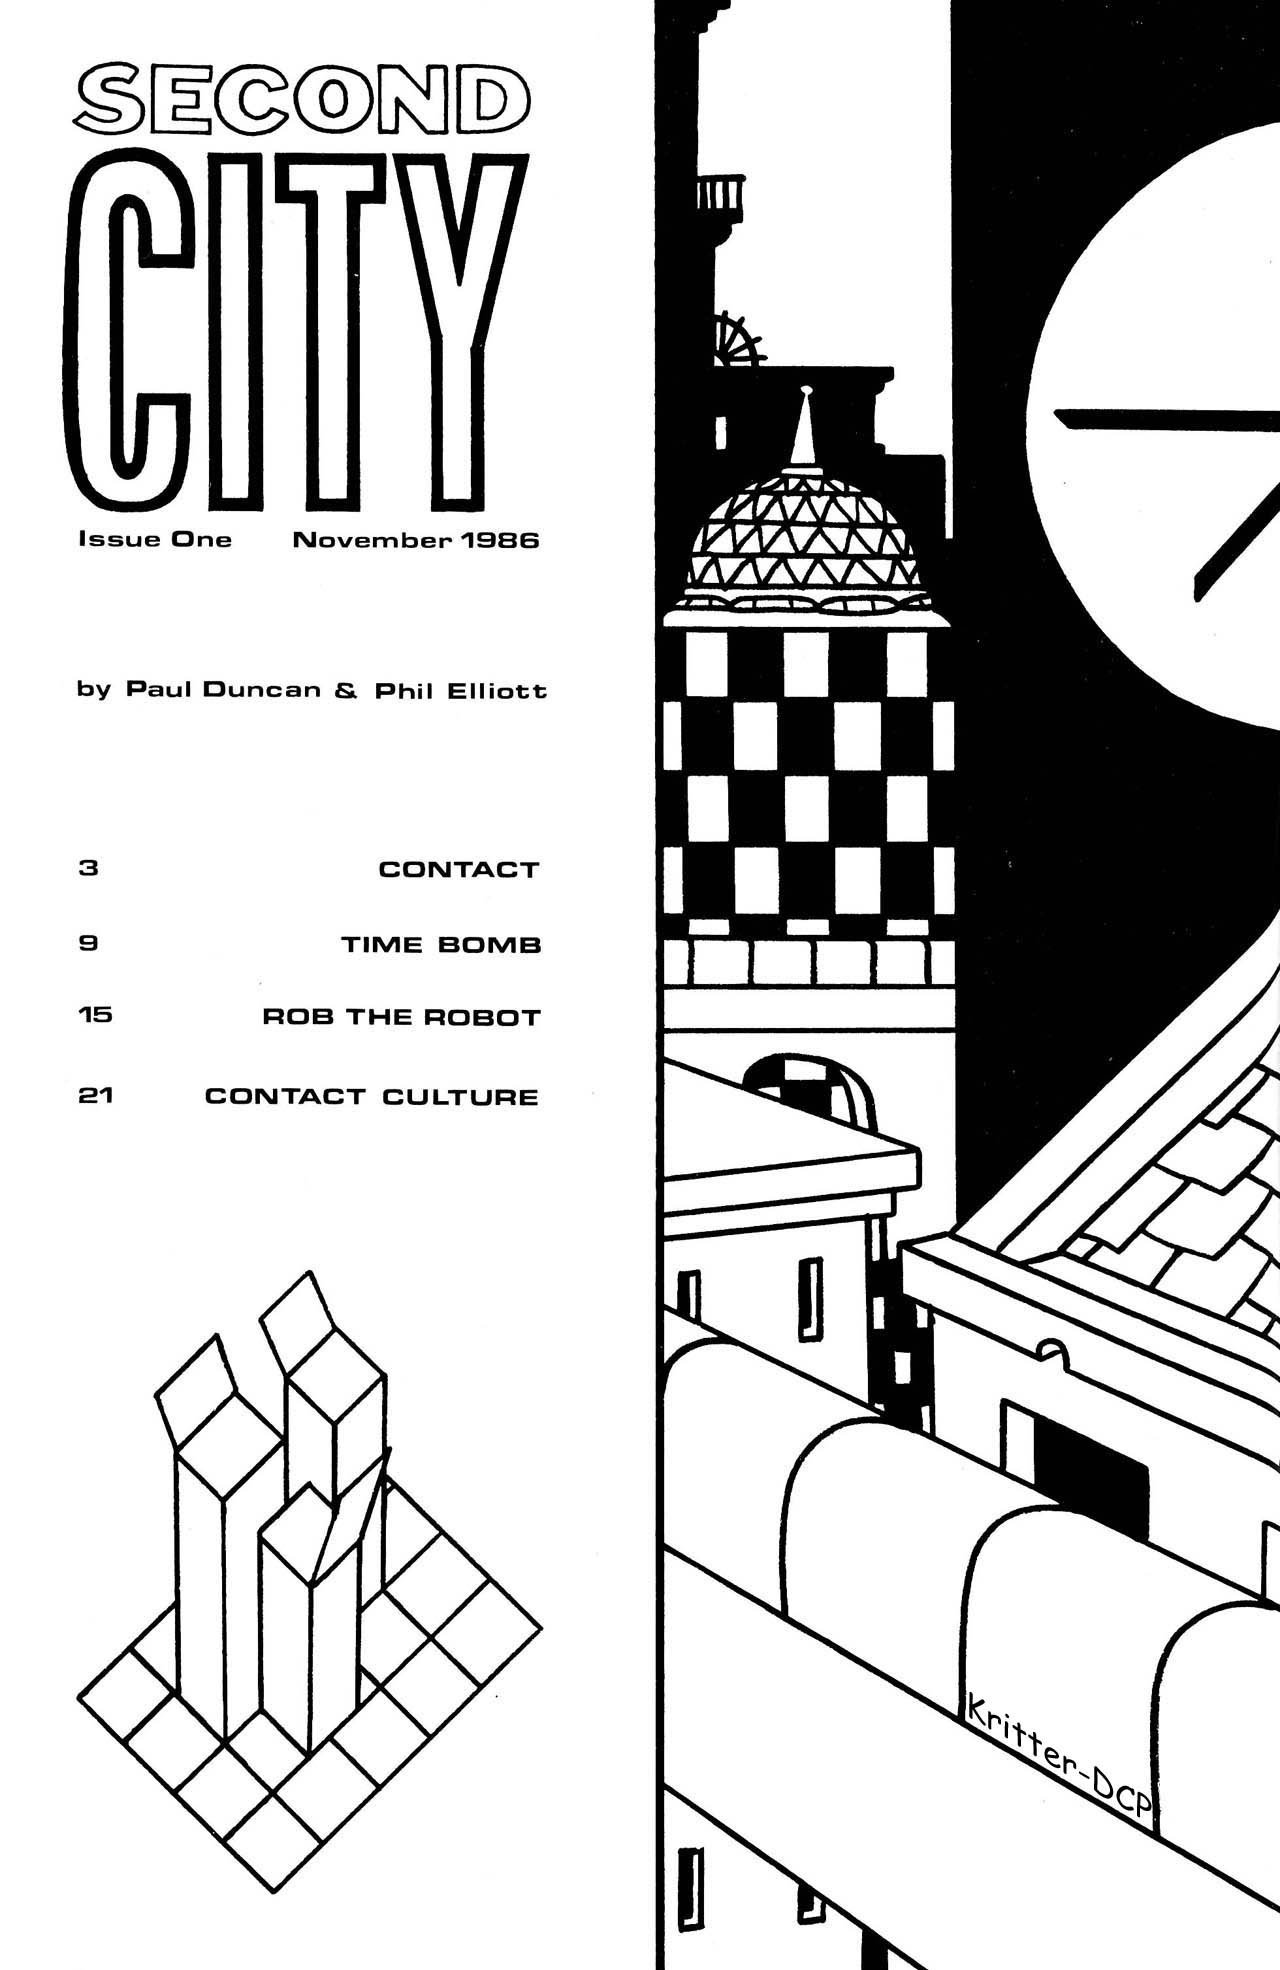 Read online Second City comic -  Issue #1 - 2